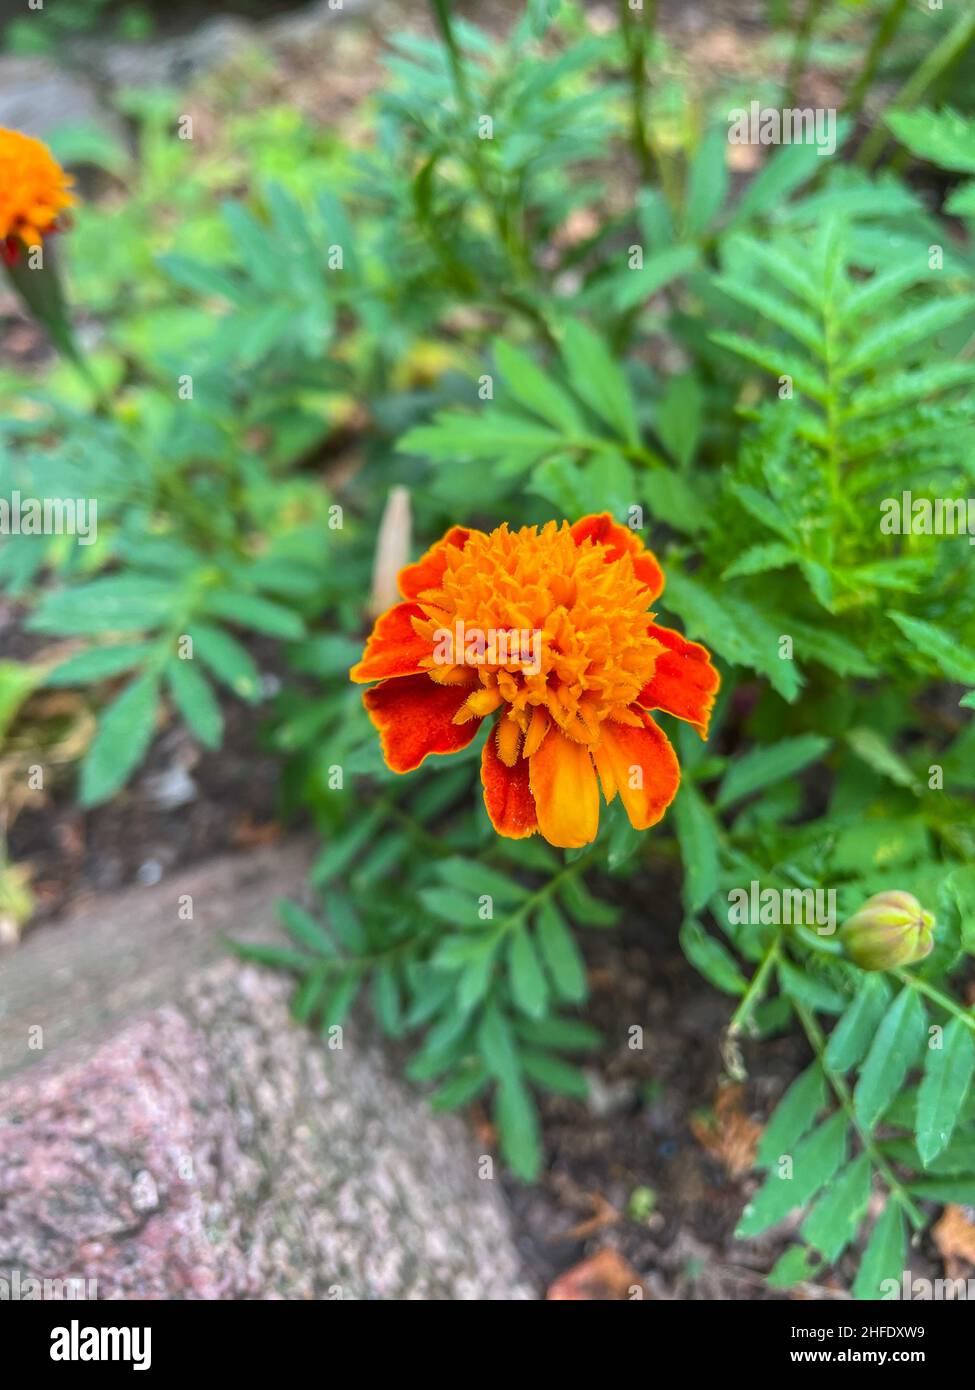 Marigold (Tagetes erecta) is a species of the genus Tagetes native to Mexico and Central America. Stock Photo